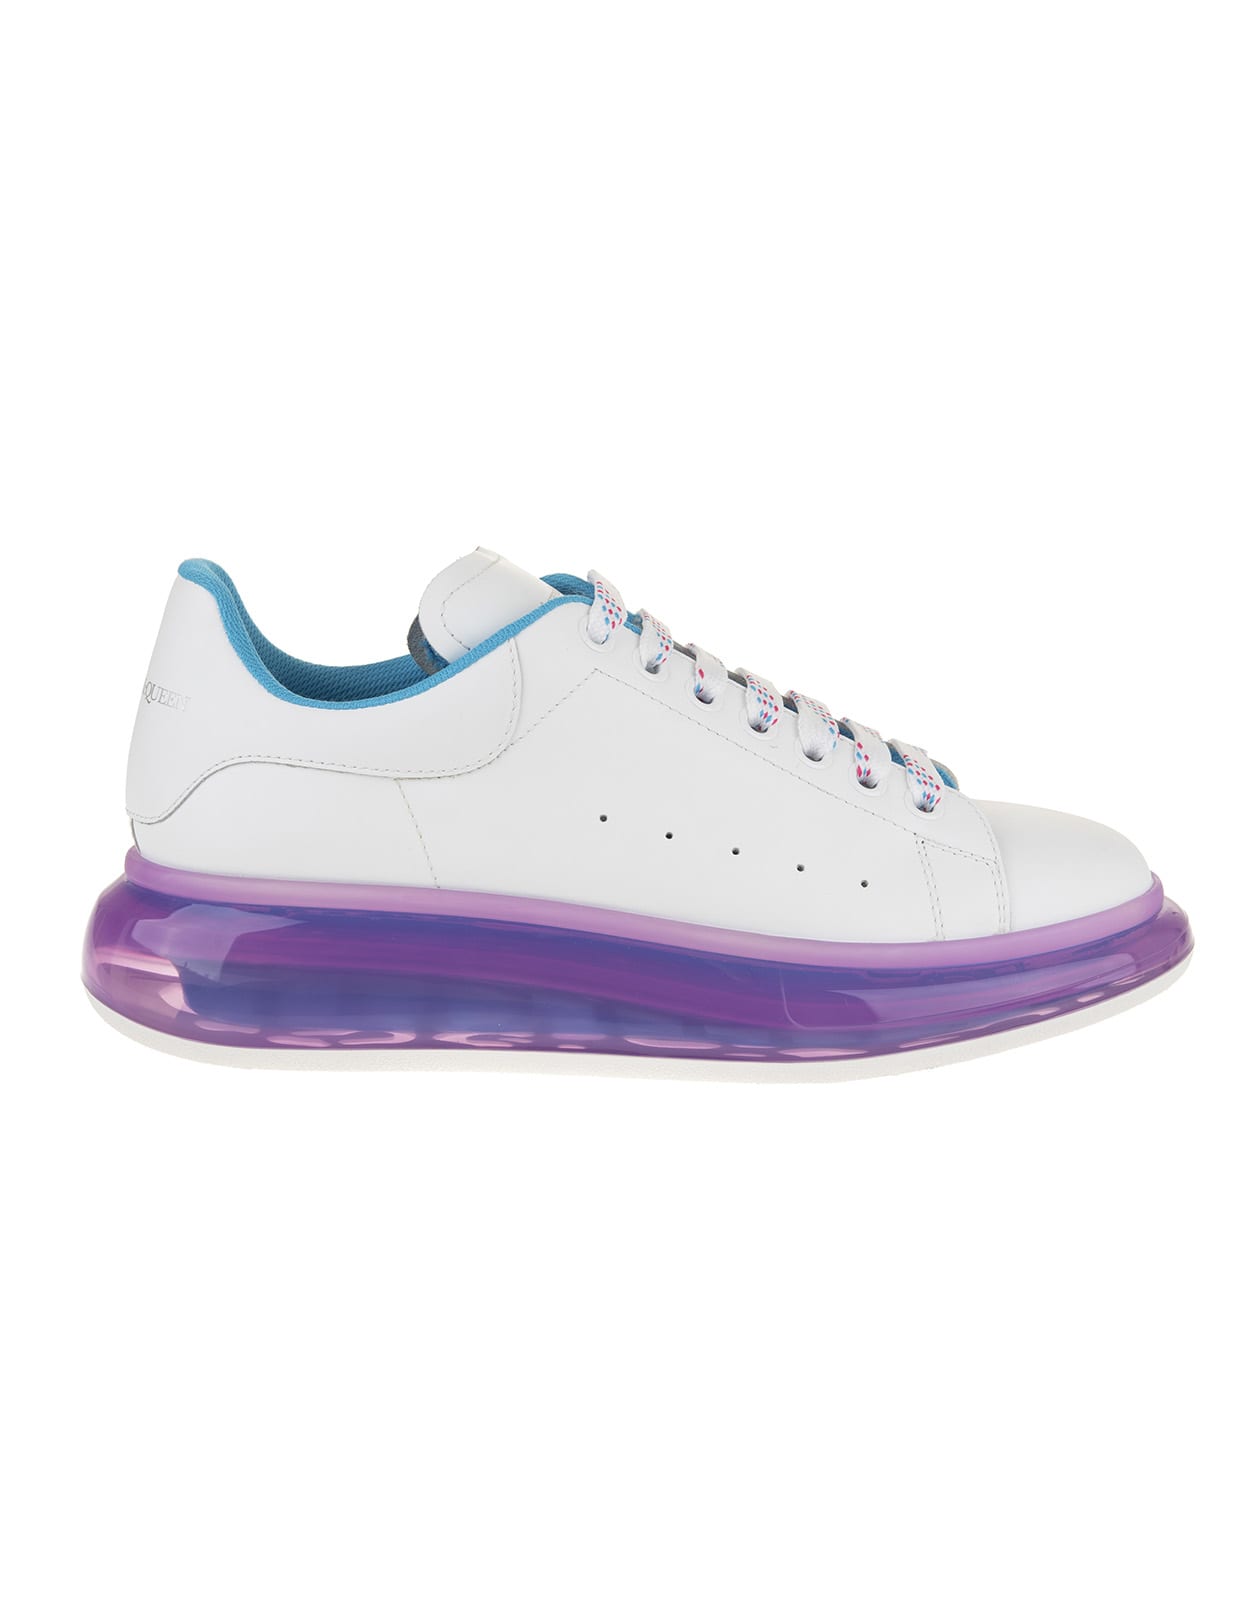 Buy Alexander McQueen Woman White And Blue Oversize Sneakers With Purple Transparent Sole online, shop Alexander McQueen shoes with free shipping